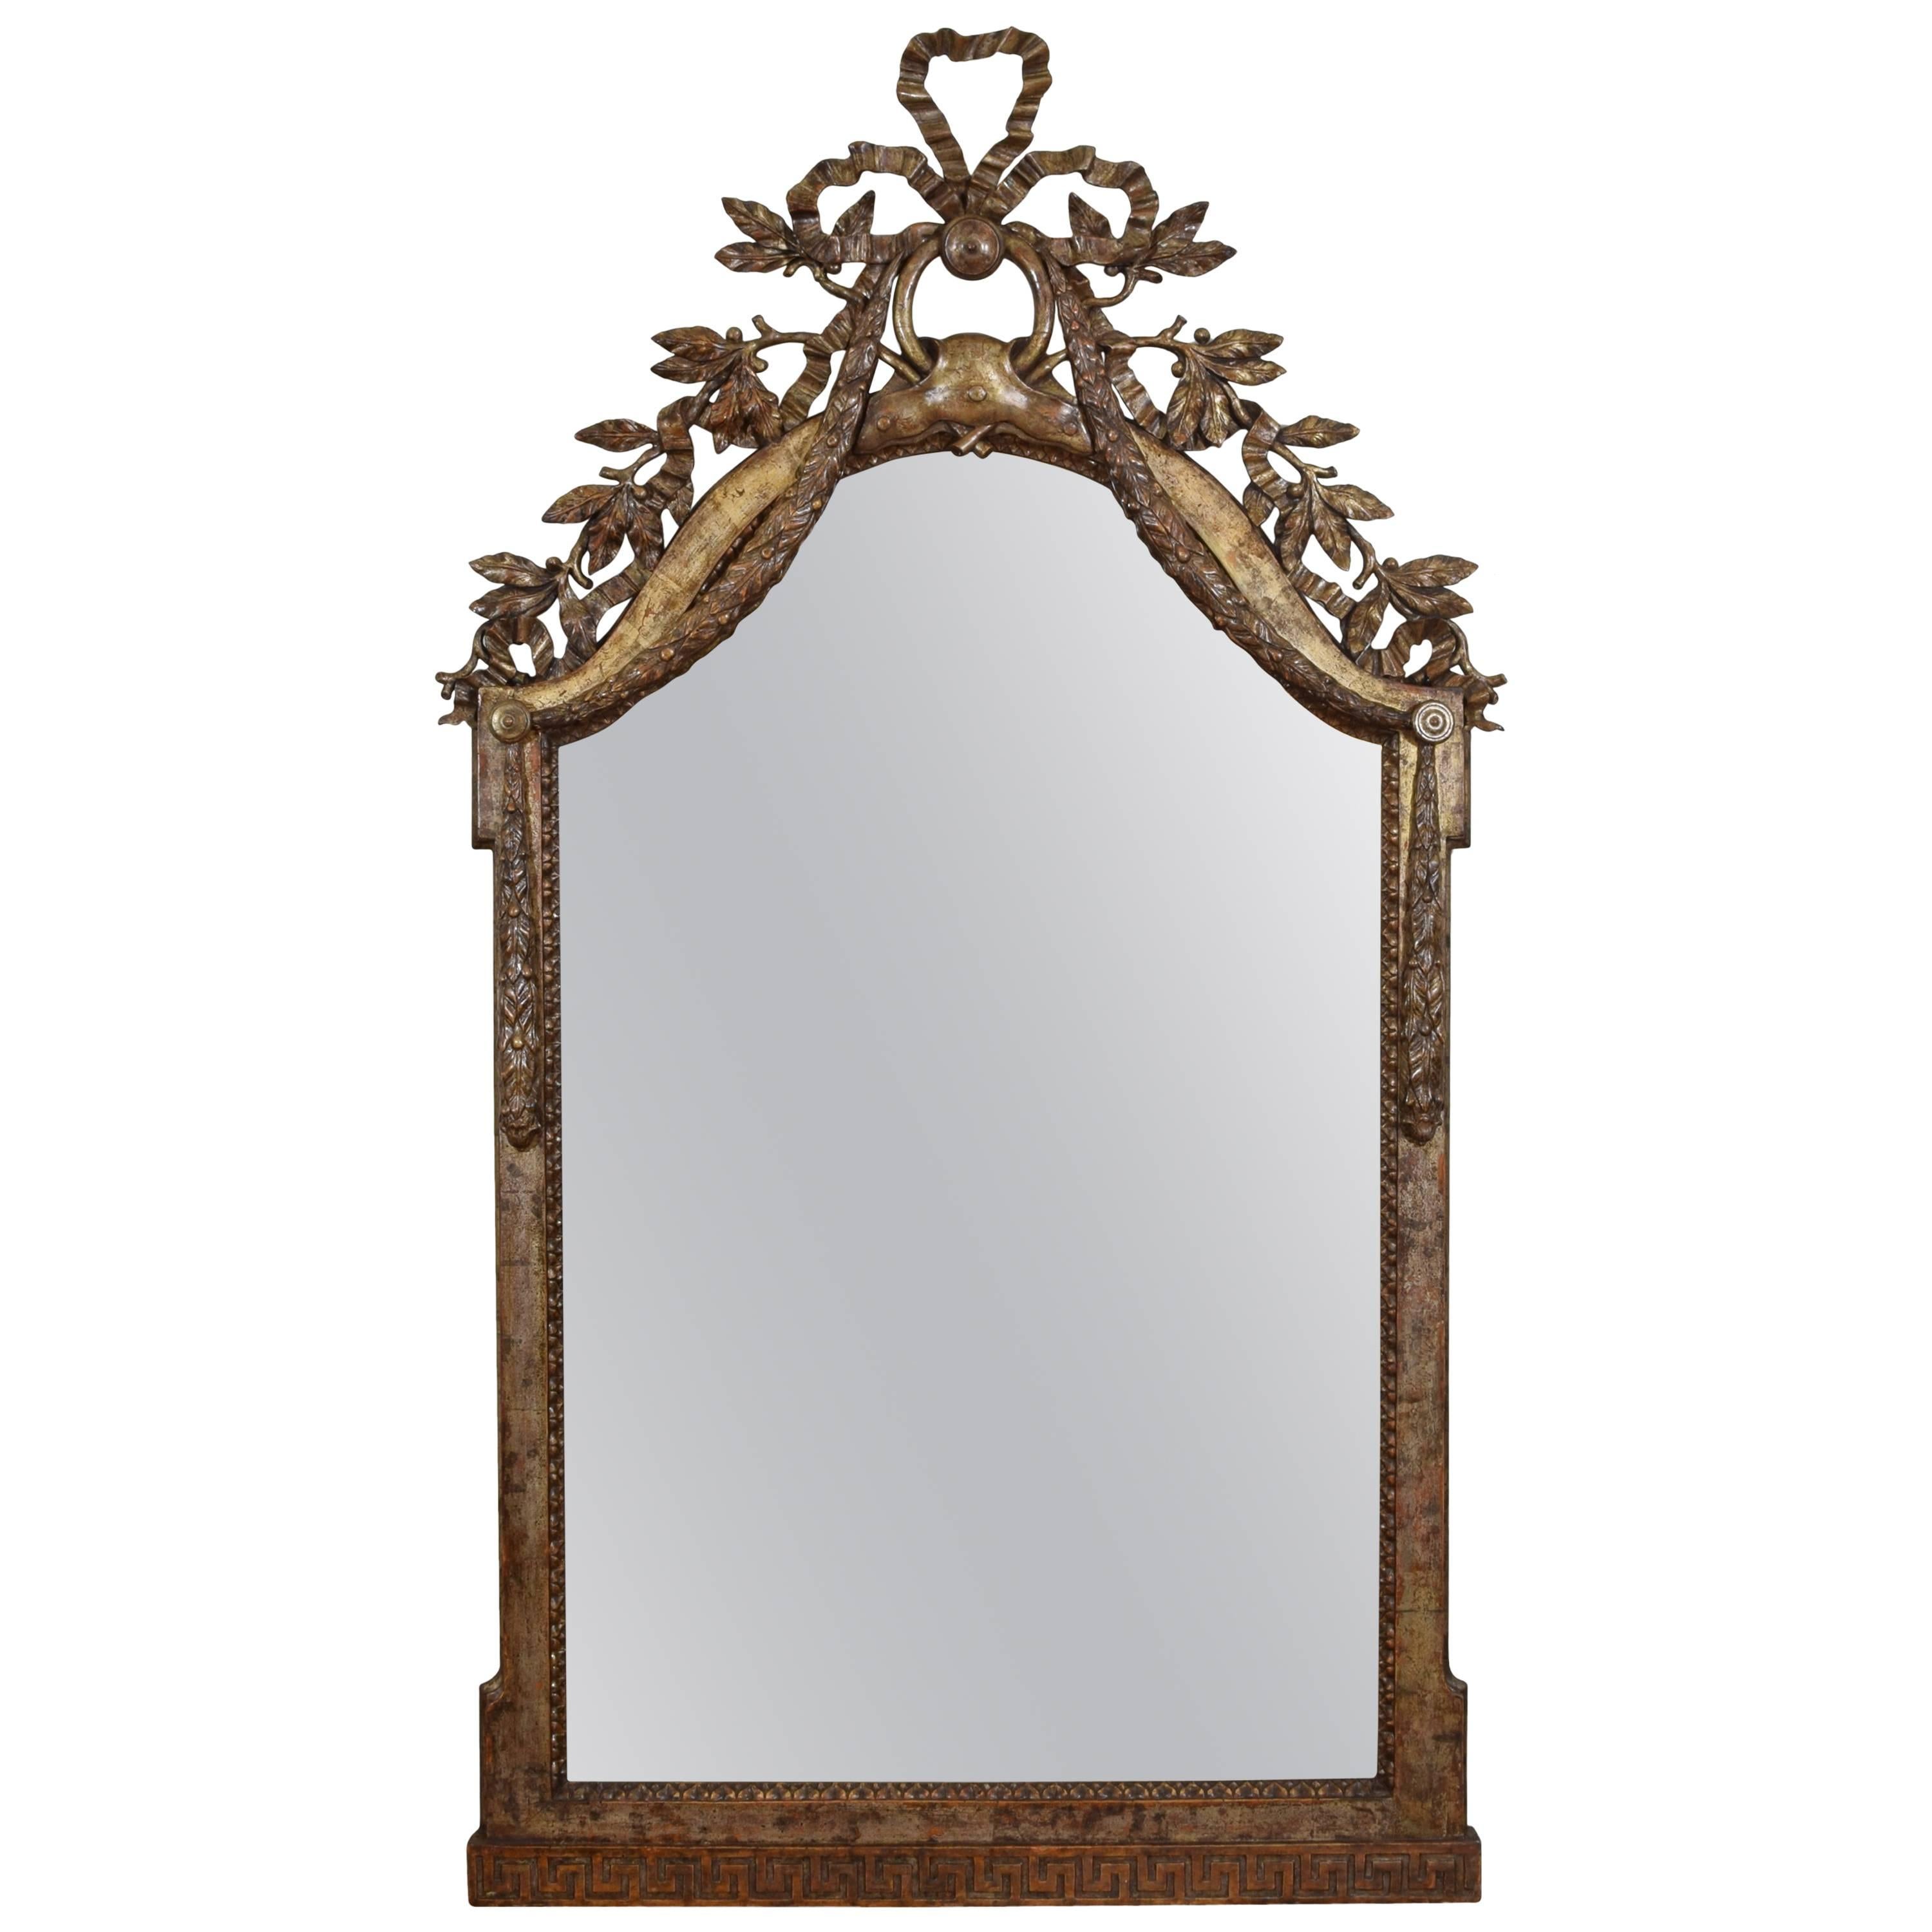 Exceptional Italian, Parma, Carved and Silvered Wooden Mirror, circa 1780